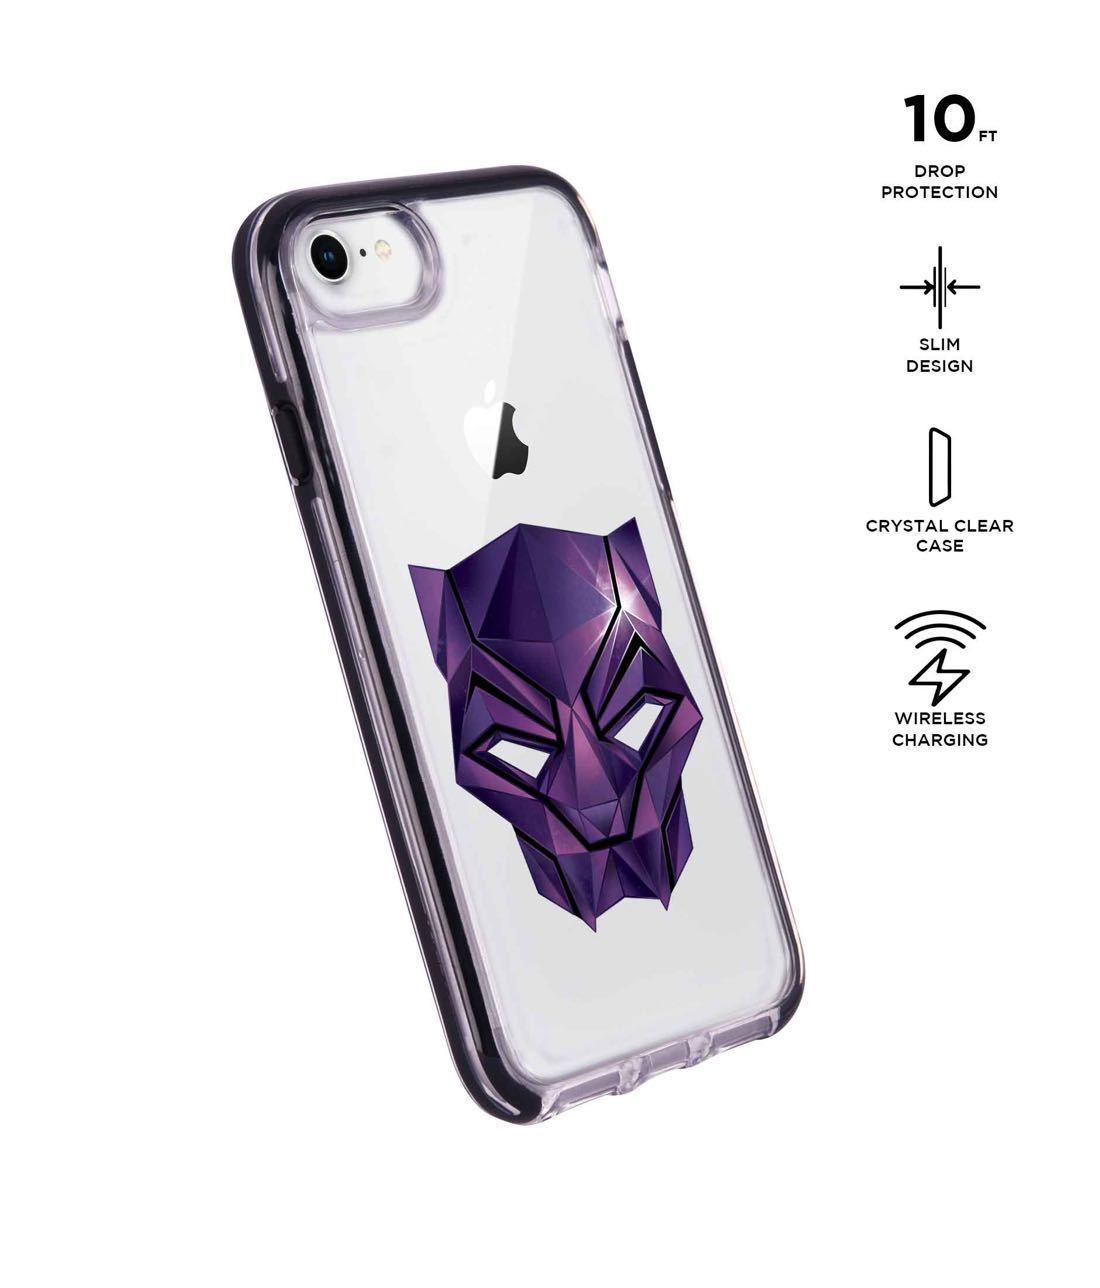 Black Panther Logo - Extreme Phone Case for iPhone 8